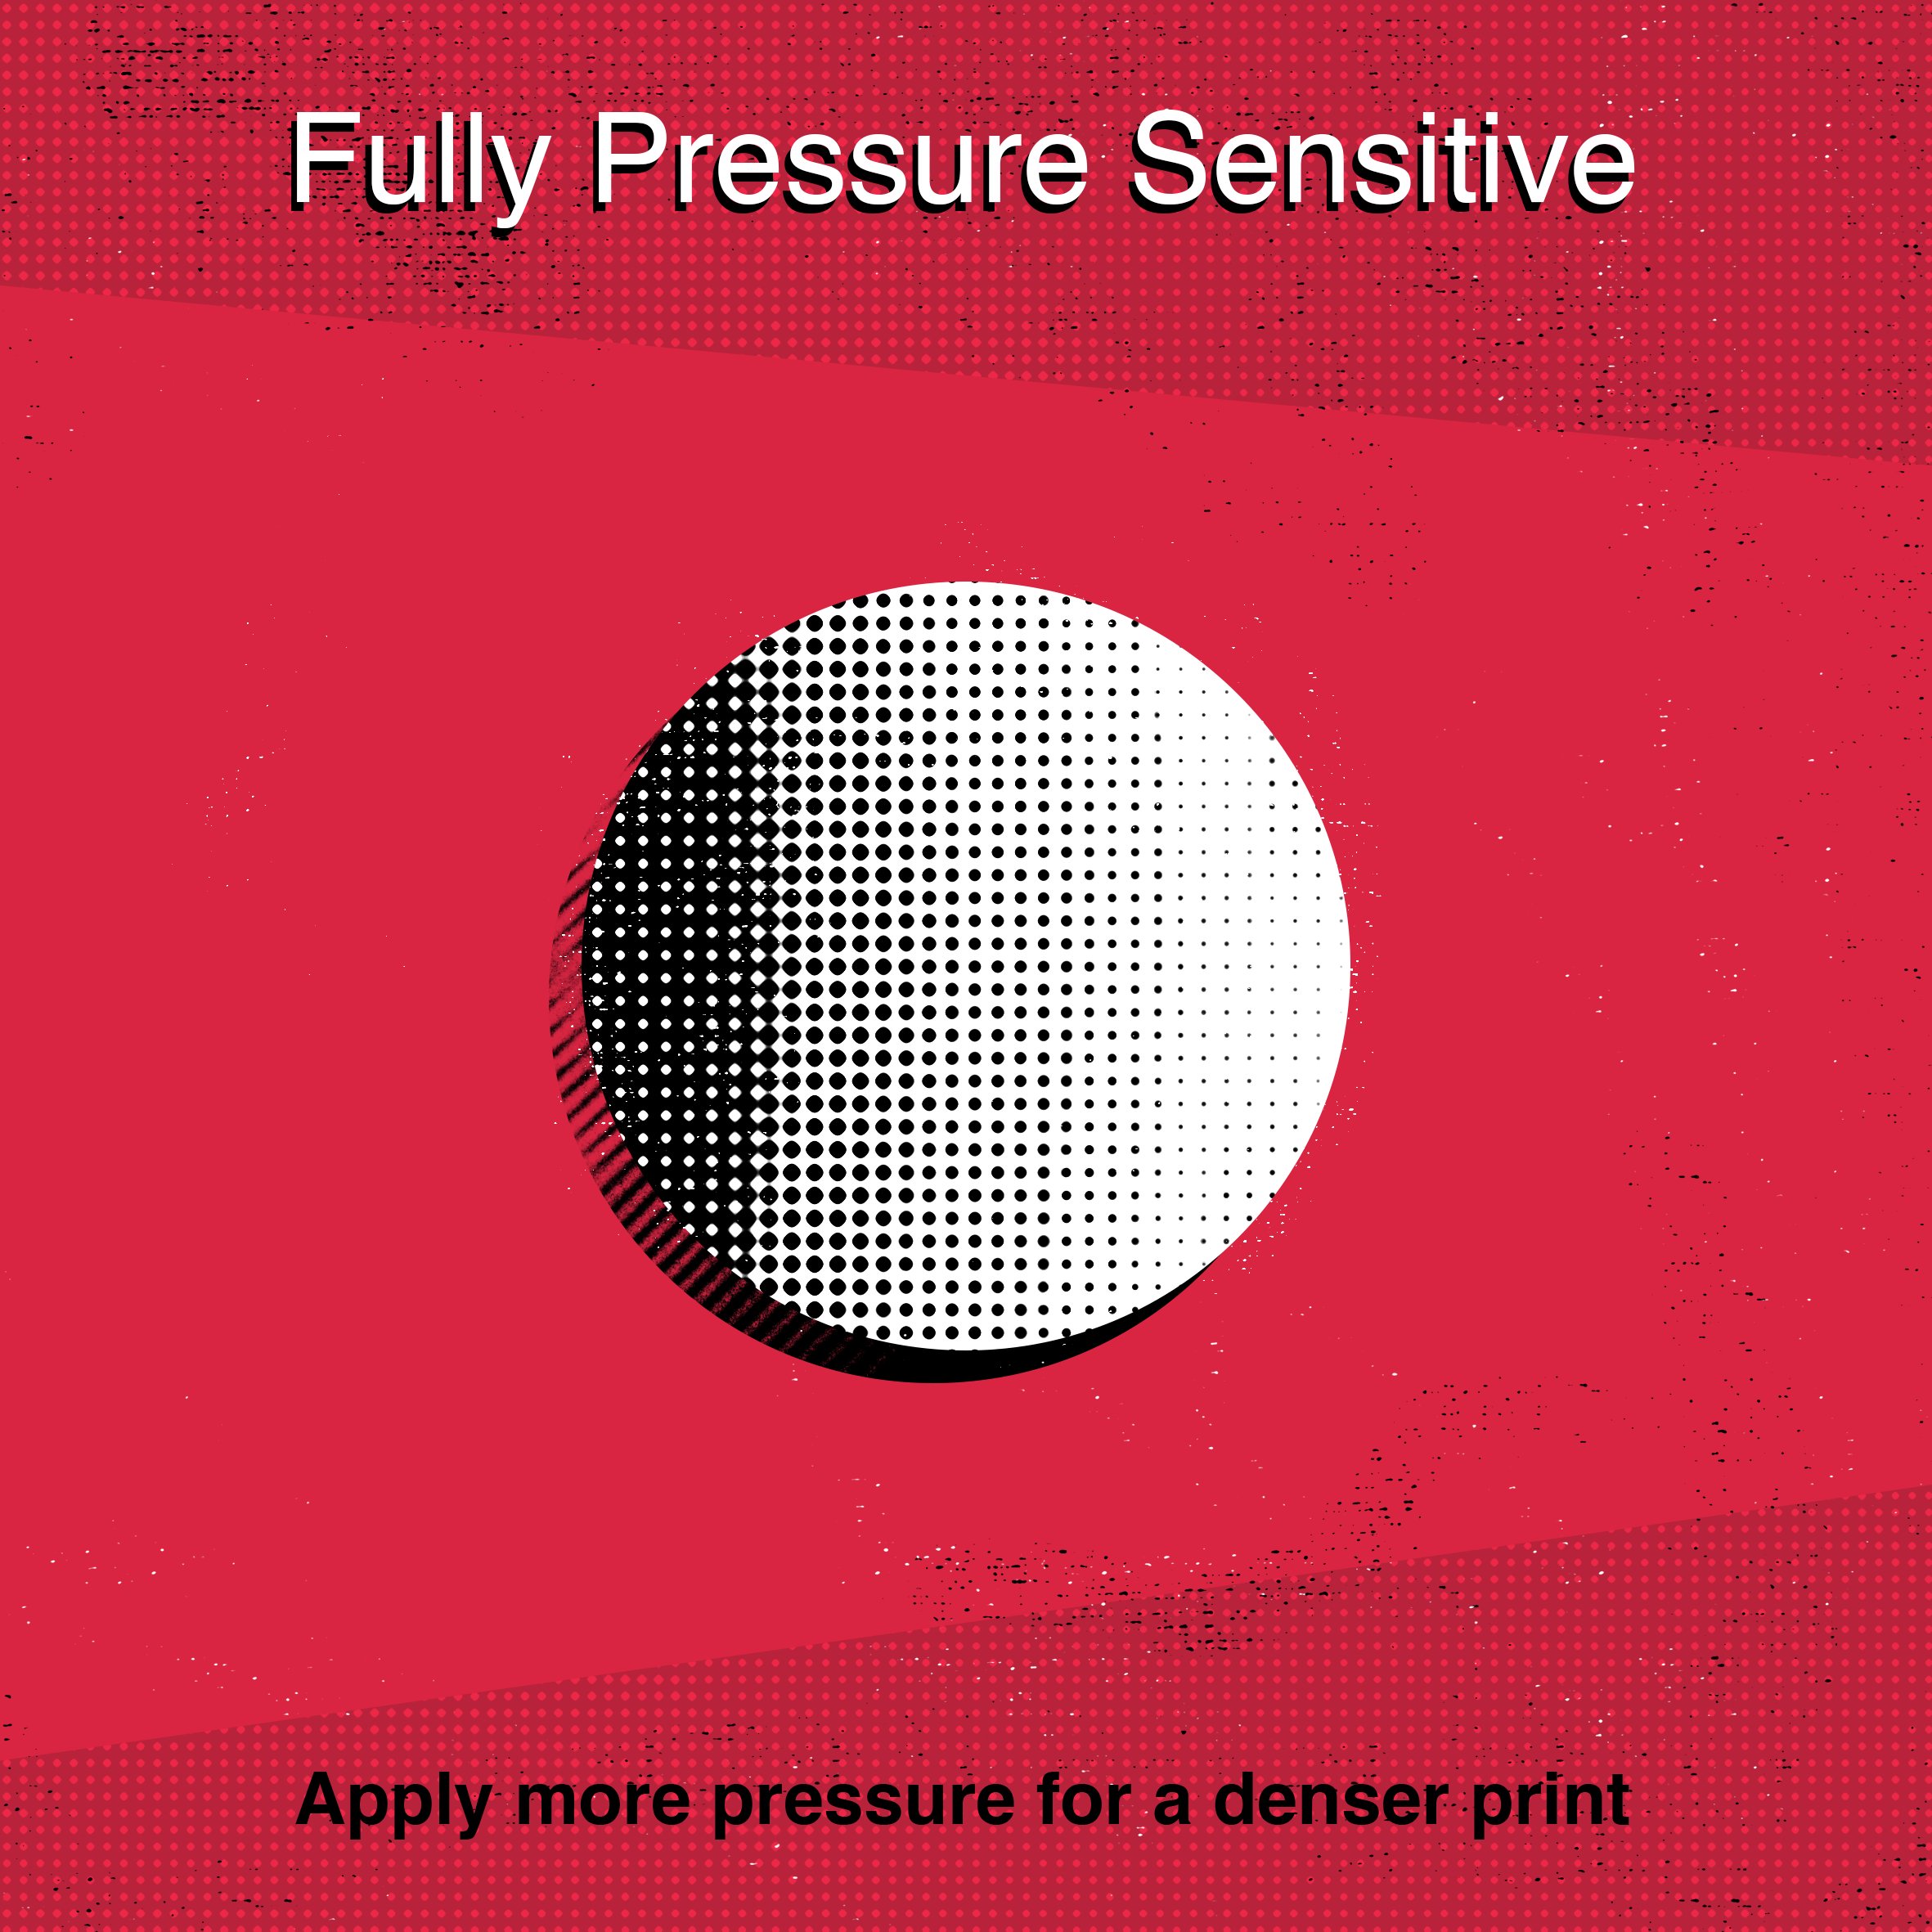 Bright red background with the fully pressure sensitive.